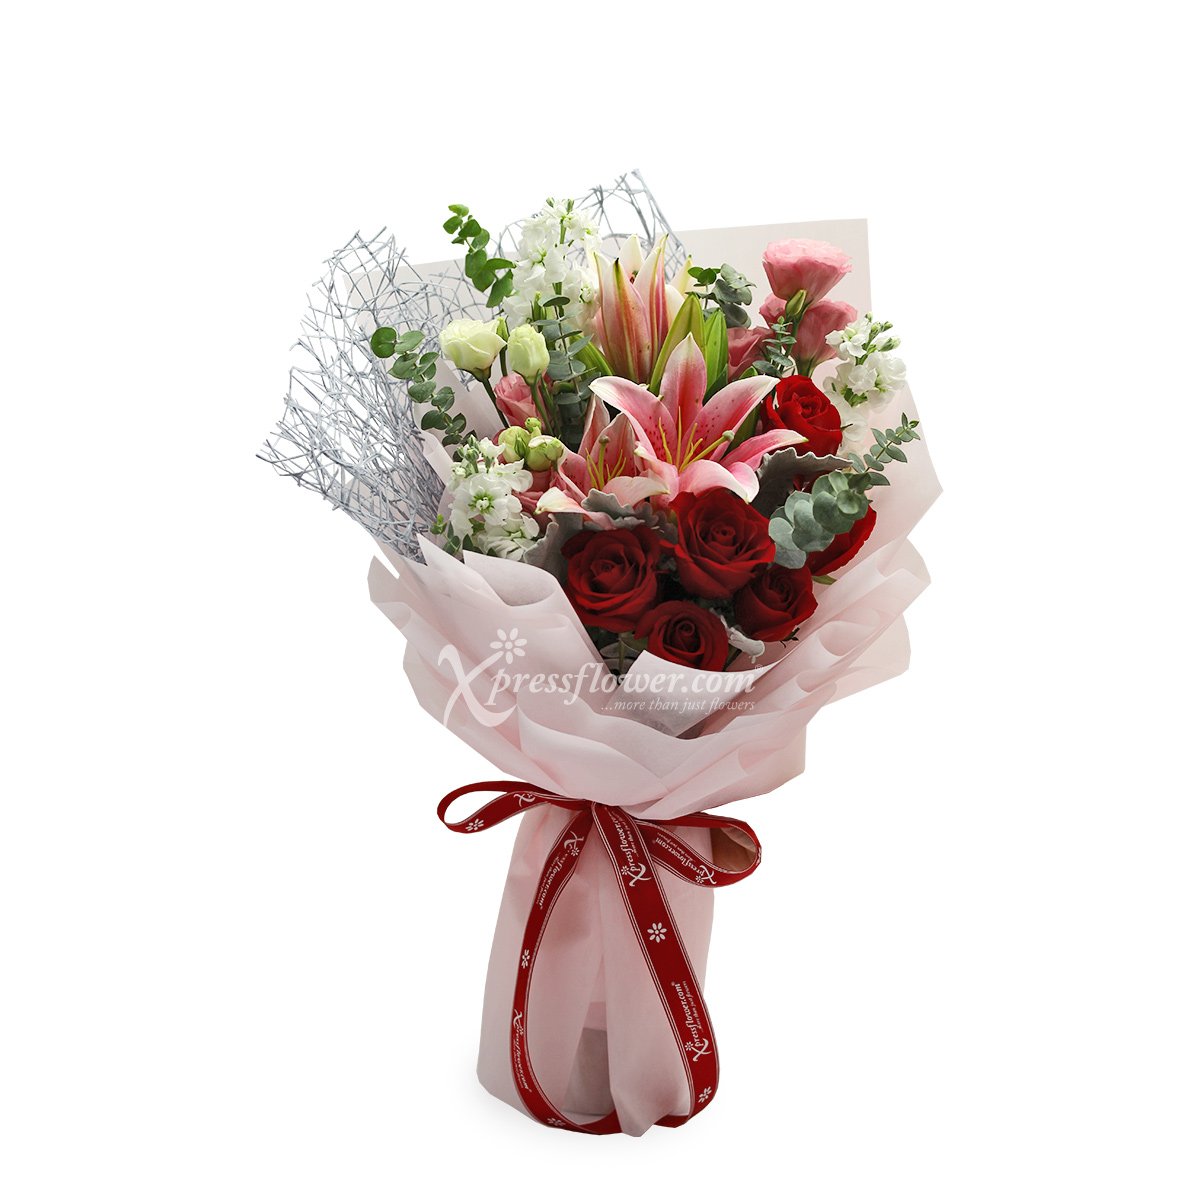 Devoted To You (6 Red Roses with Pink Lily Sprays)